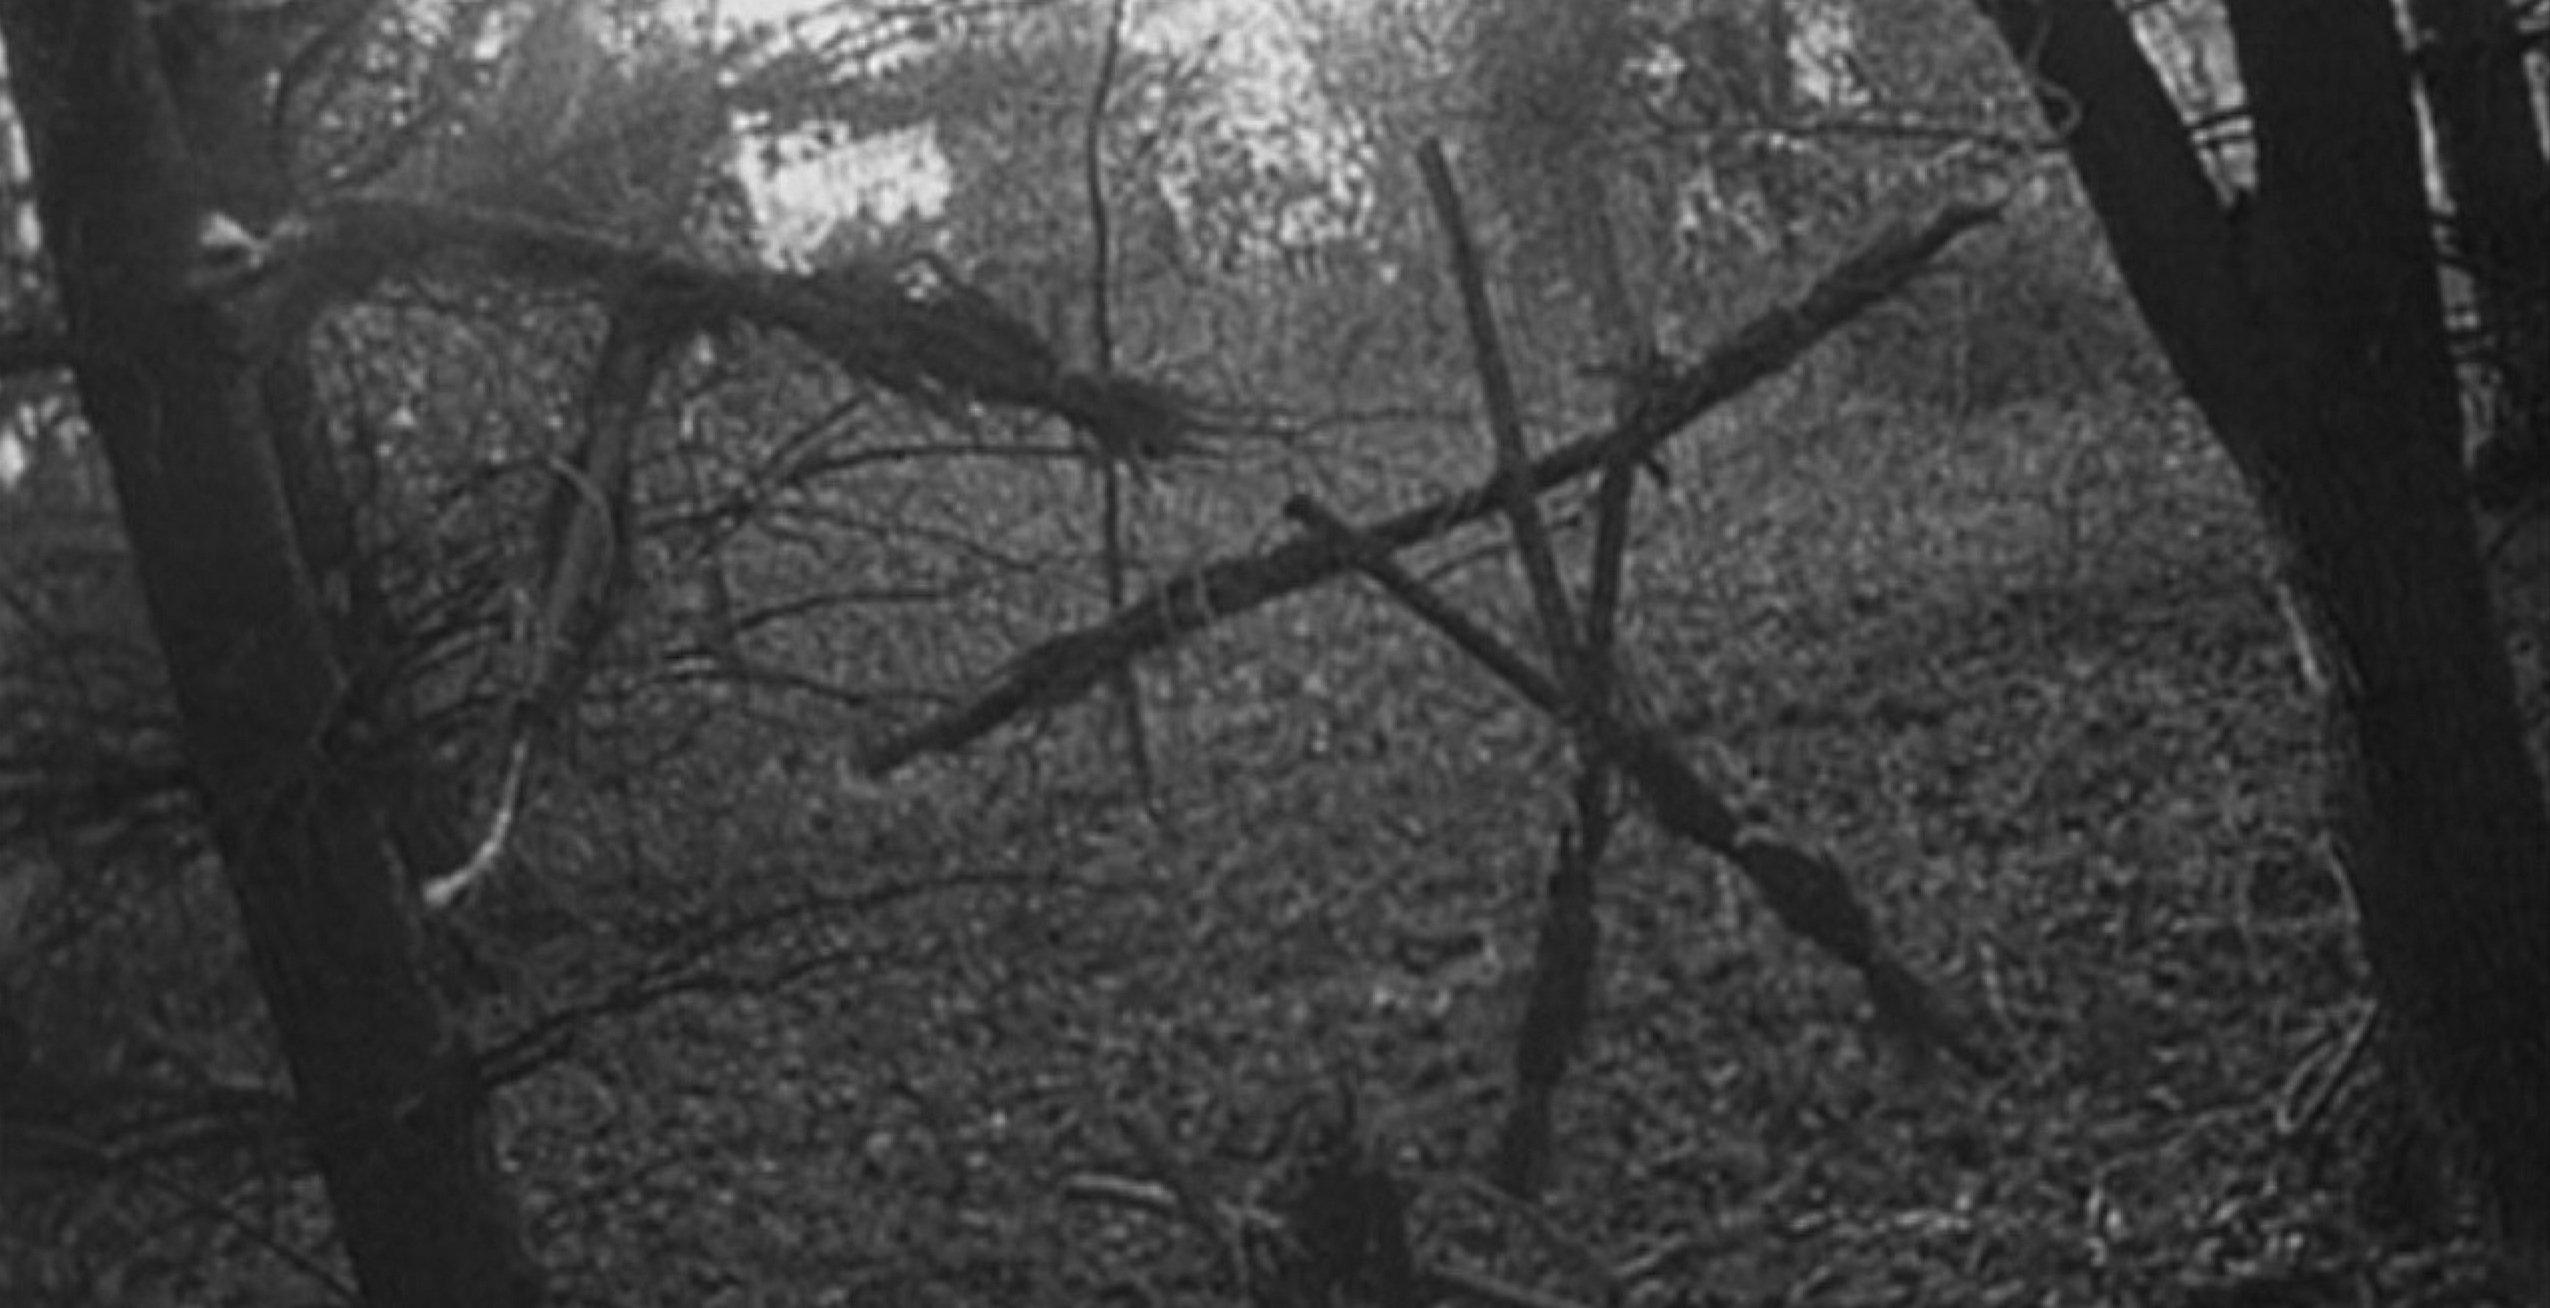 blair witch project 2016 free